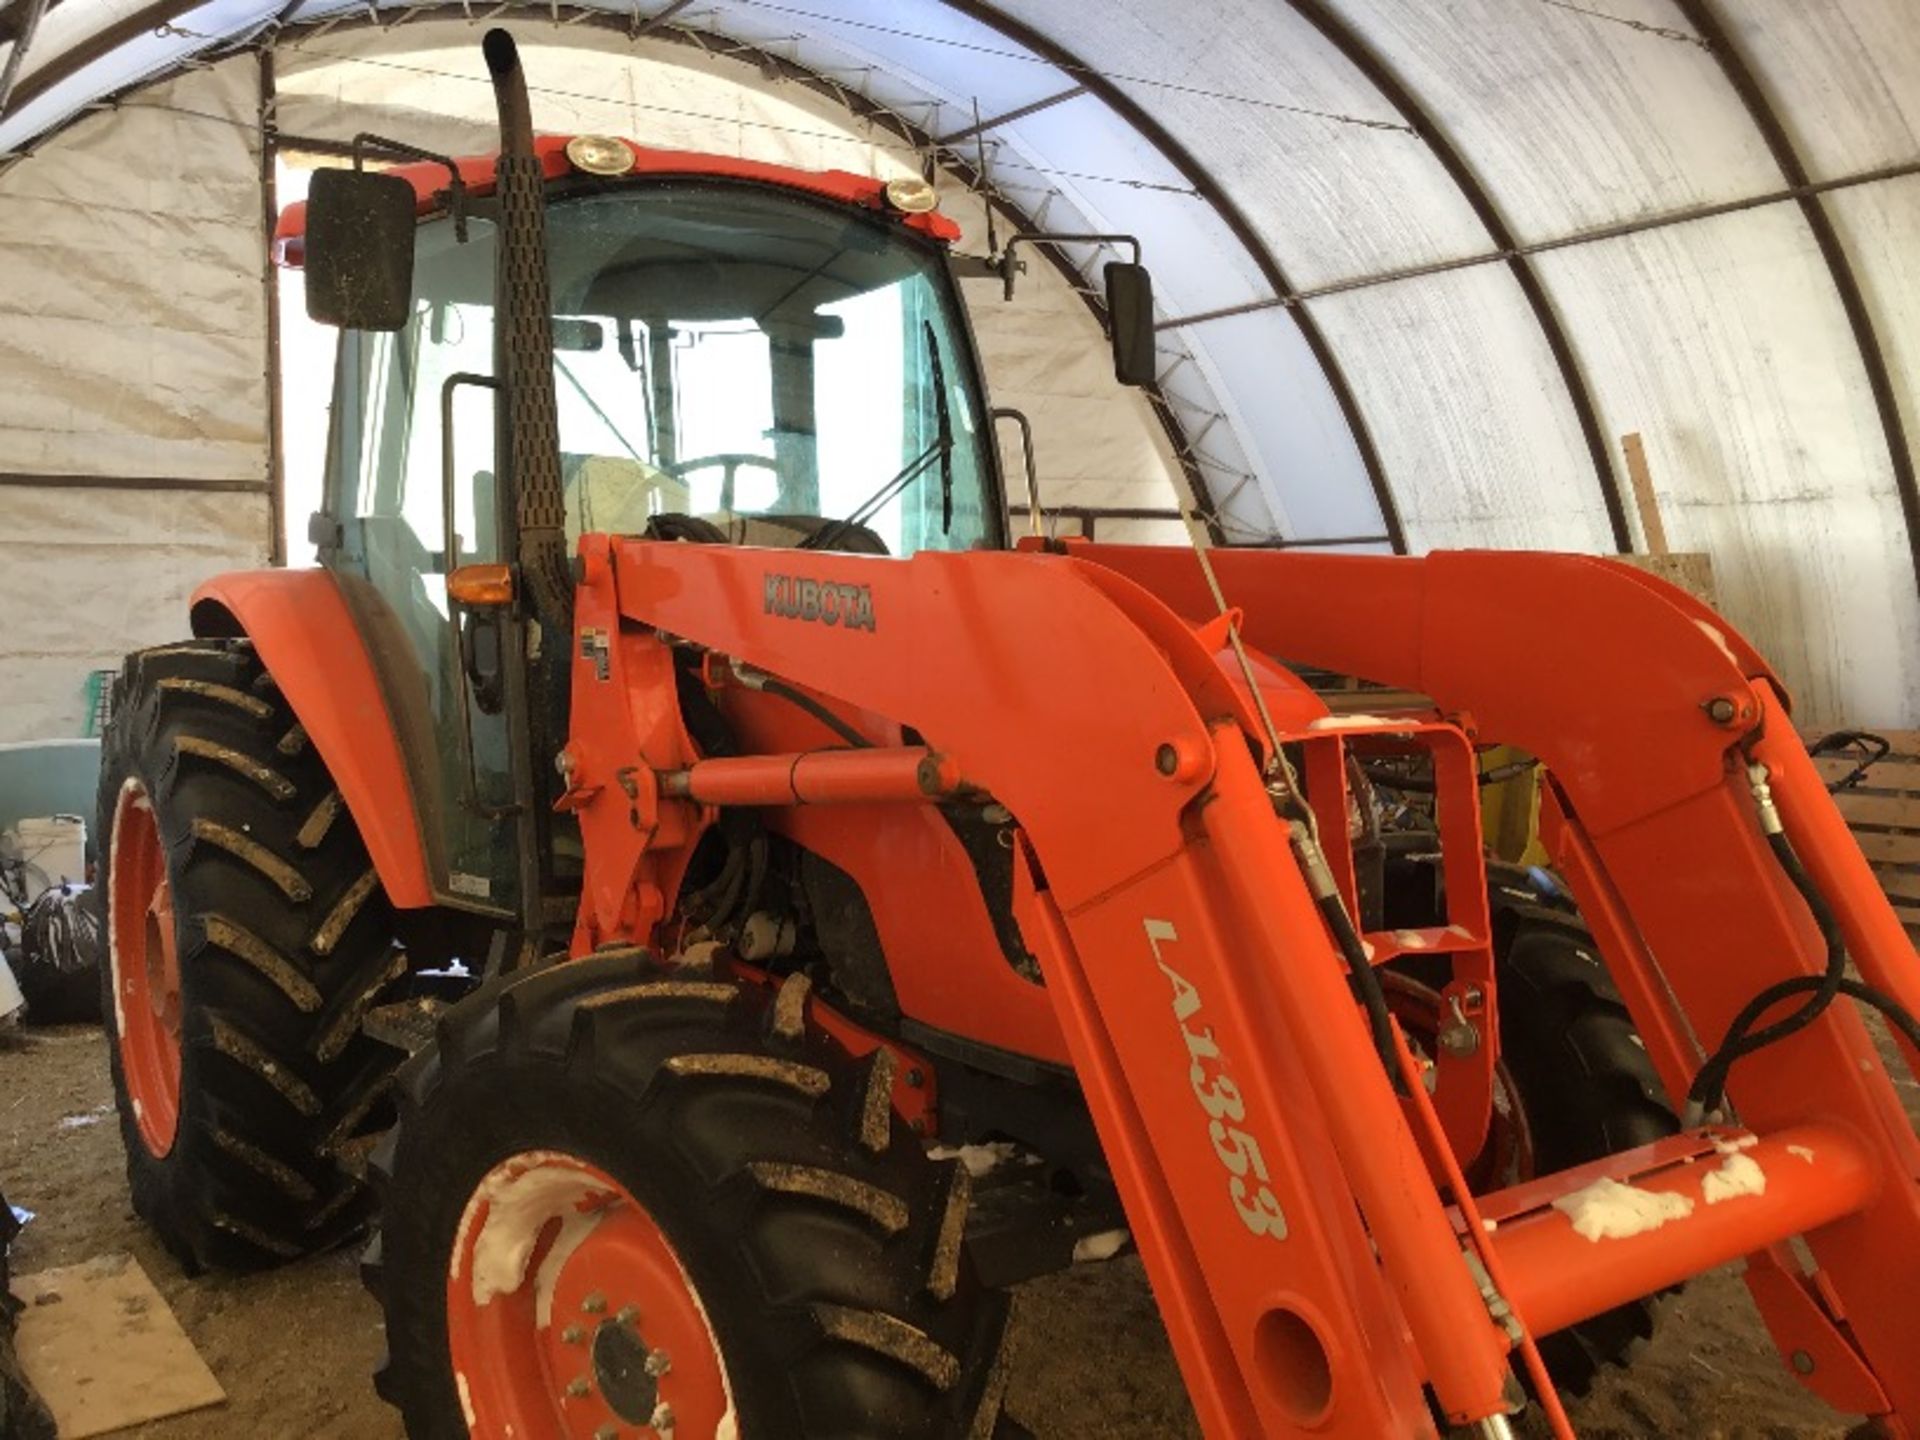 2011 M9540 Kubota Tractor W/ LA353 Front End Loader & Bucket, 2 Forks(may sell sepesrate), 1104 - Image 7 of 12